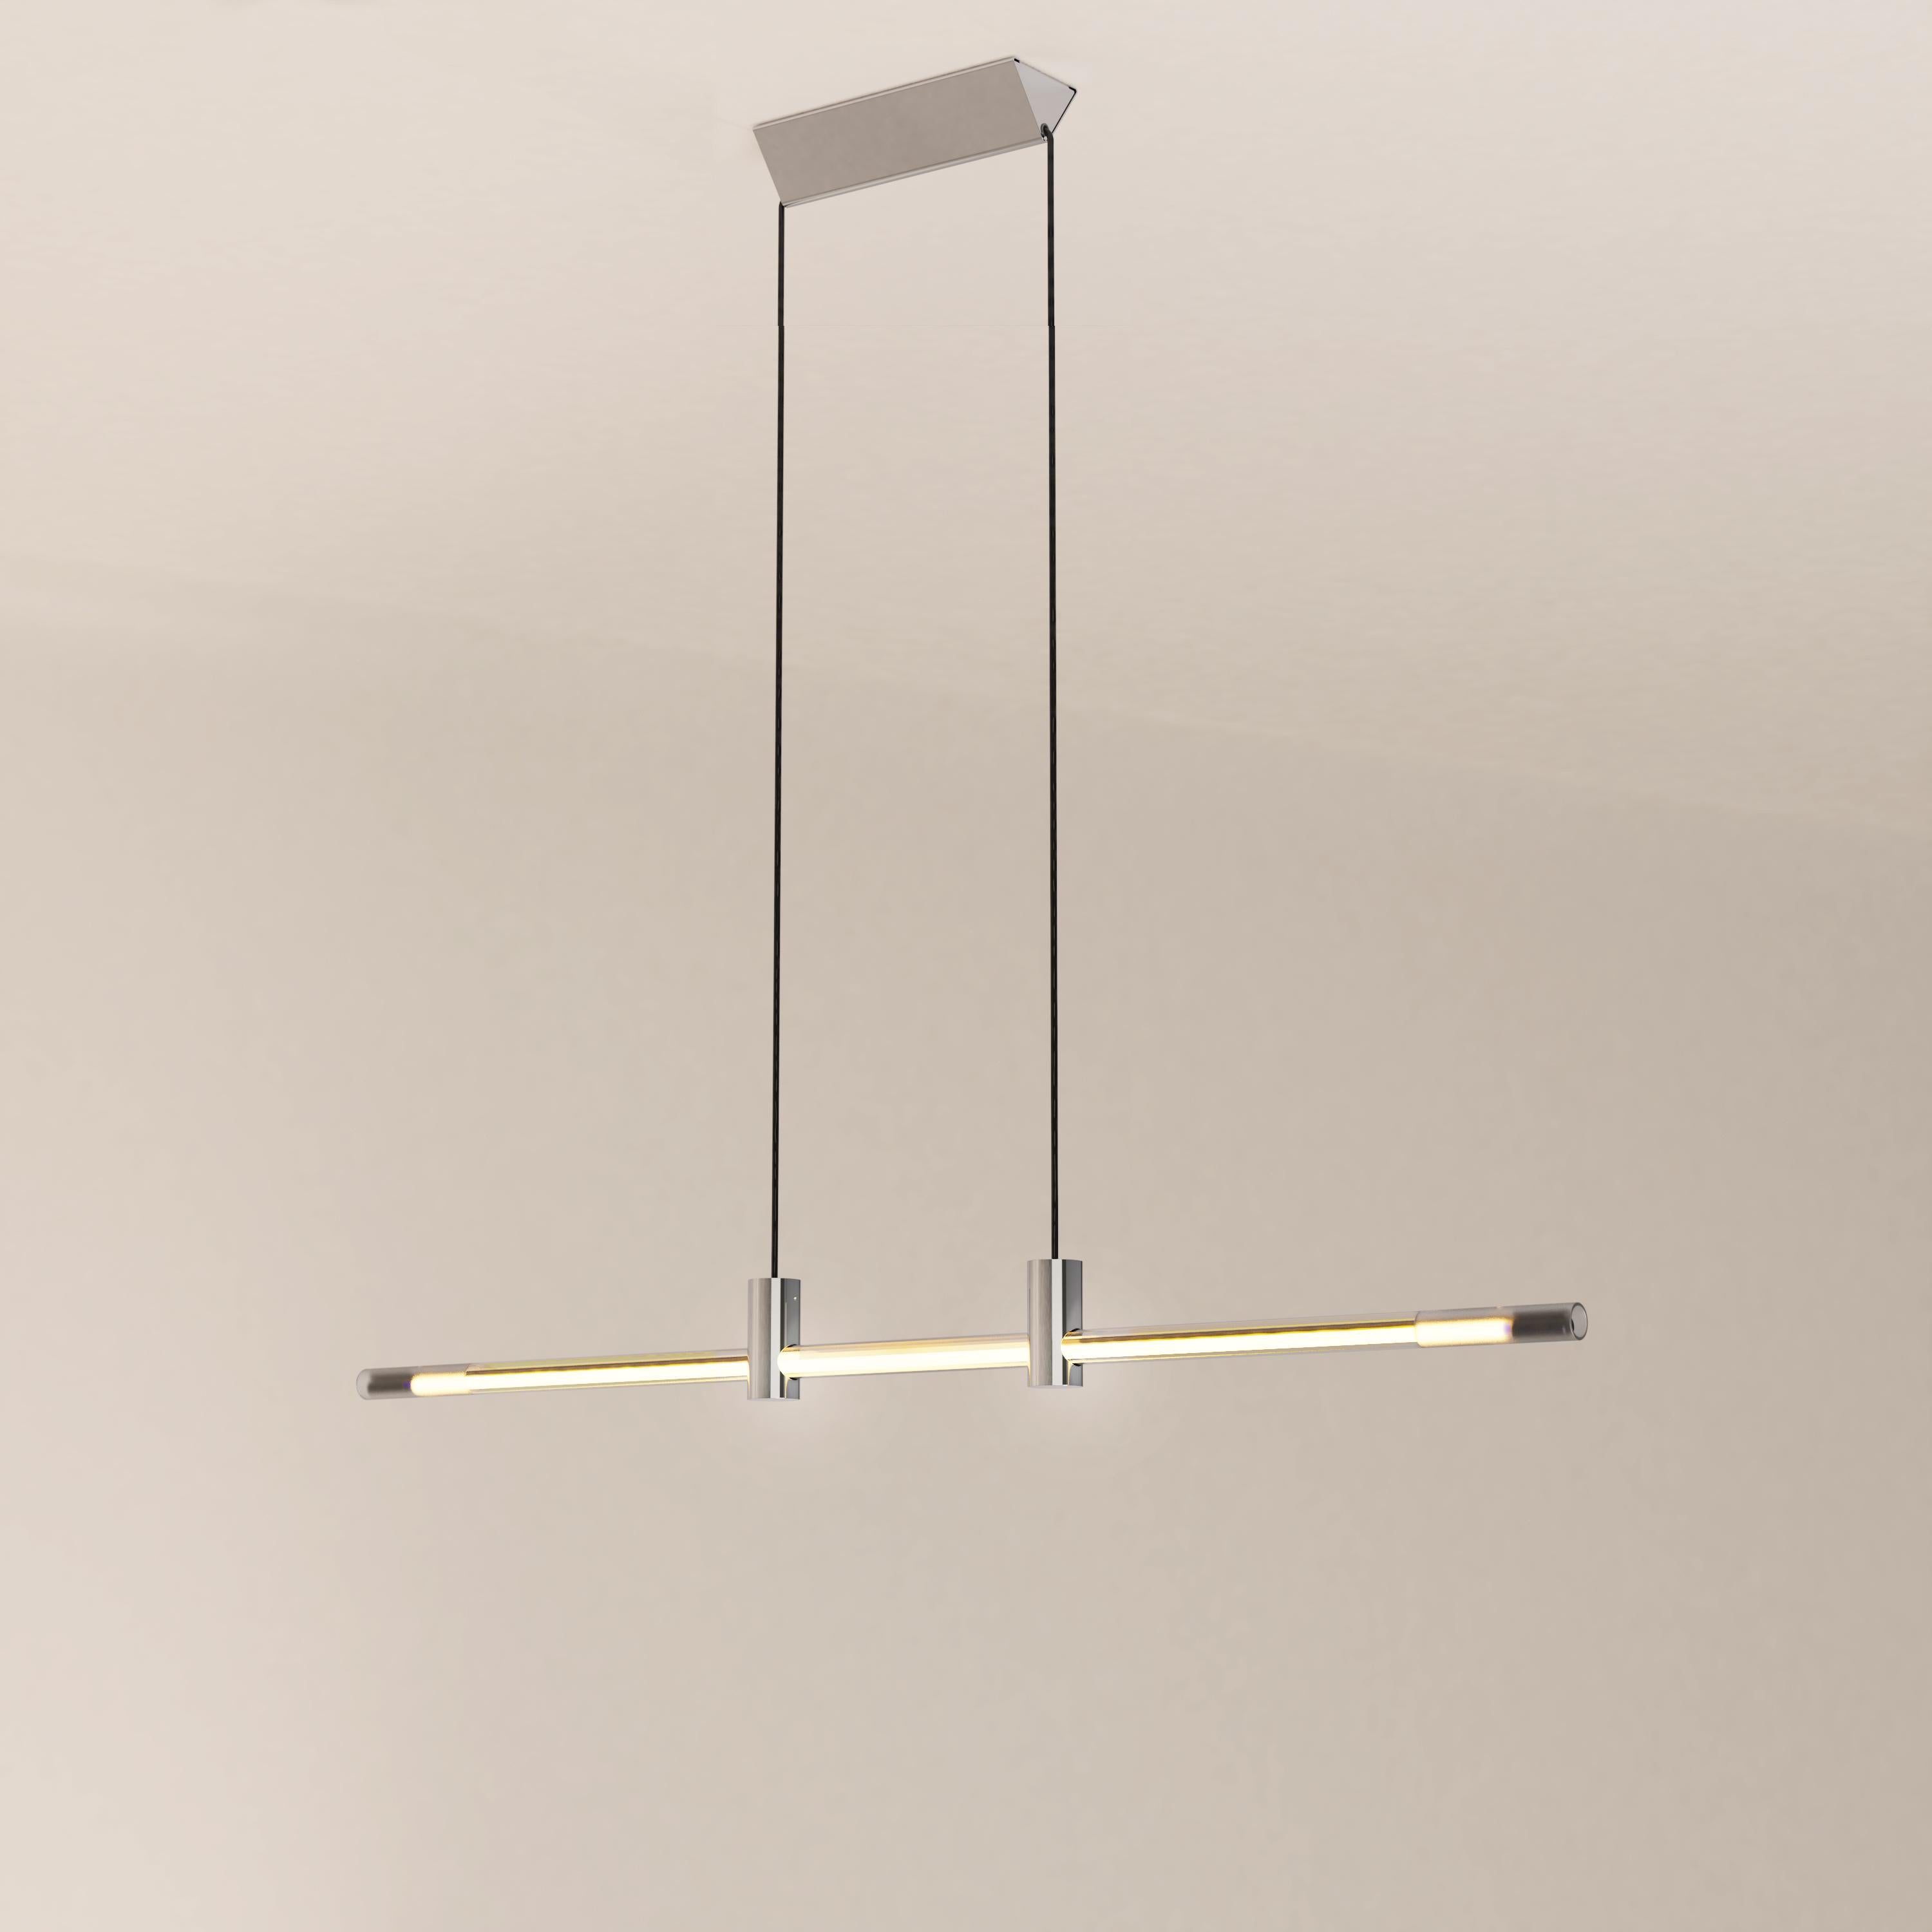 The Ra Line in its chrome plated finish is a contemporary hand-blown glass and brass pendant lighting.

The Ra Line is distinguished by a marked opposition between heaviness and lightness. The assemblage of the borosilicate glass tube